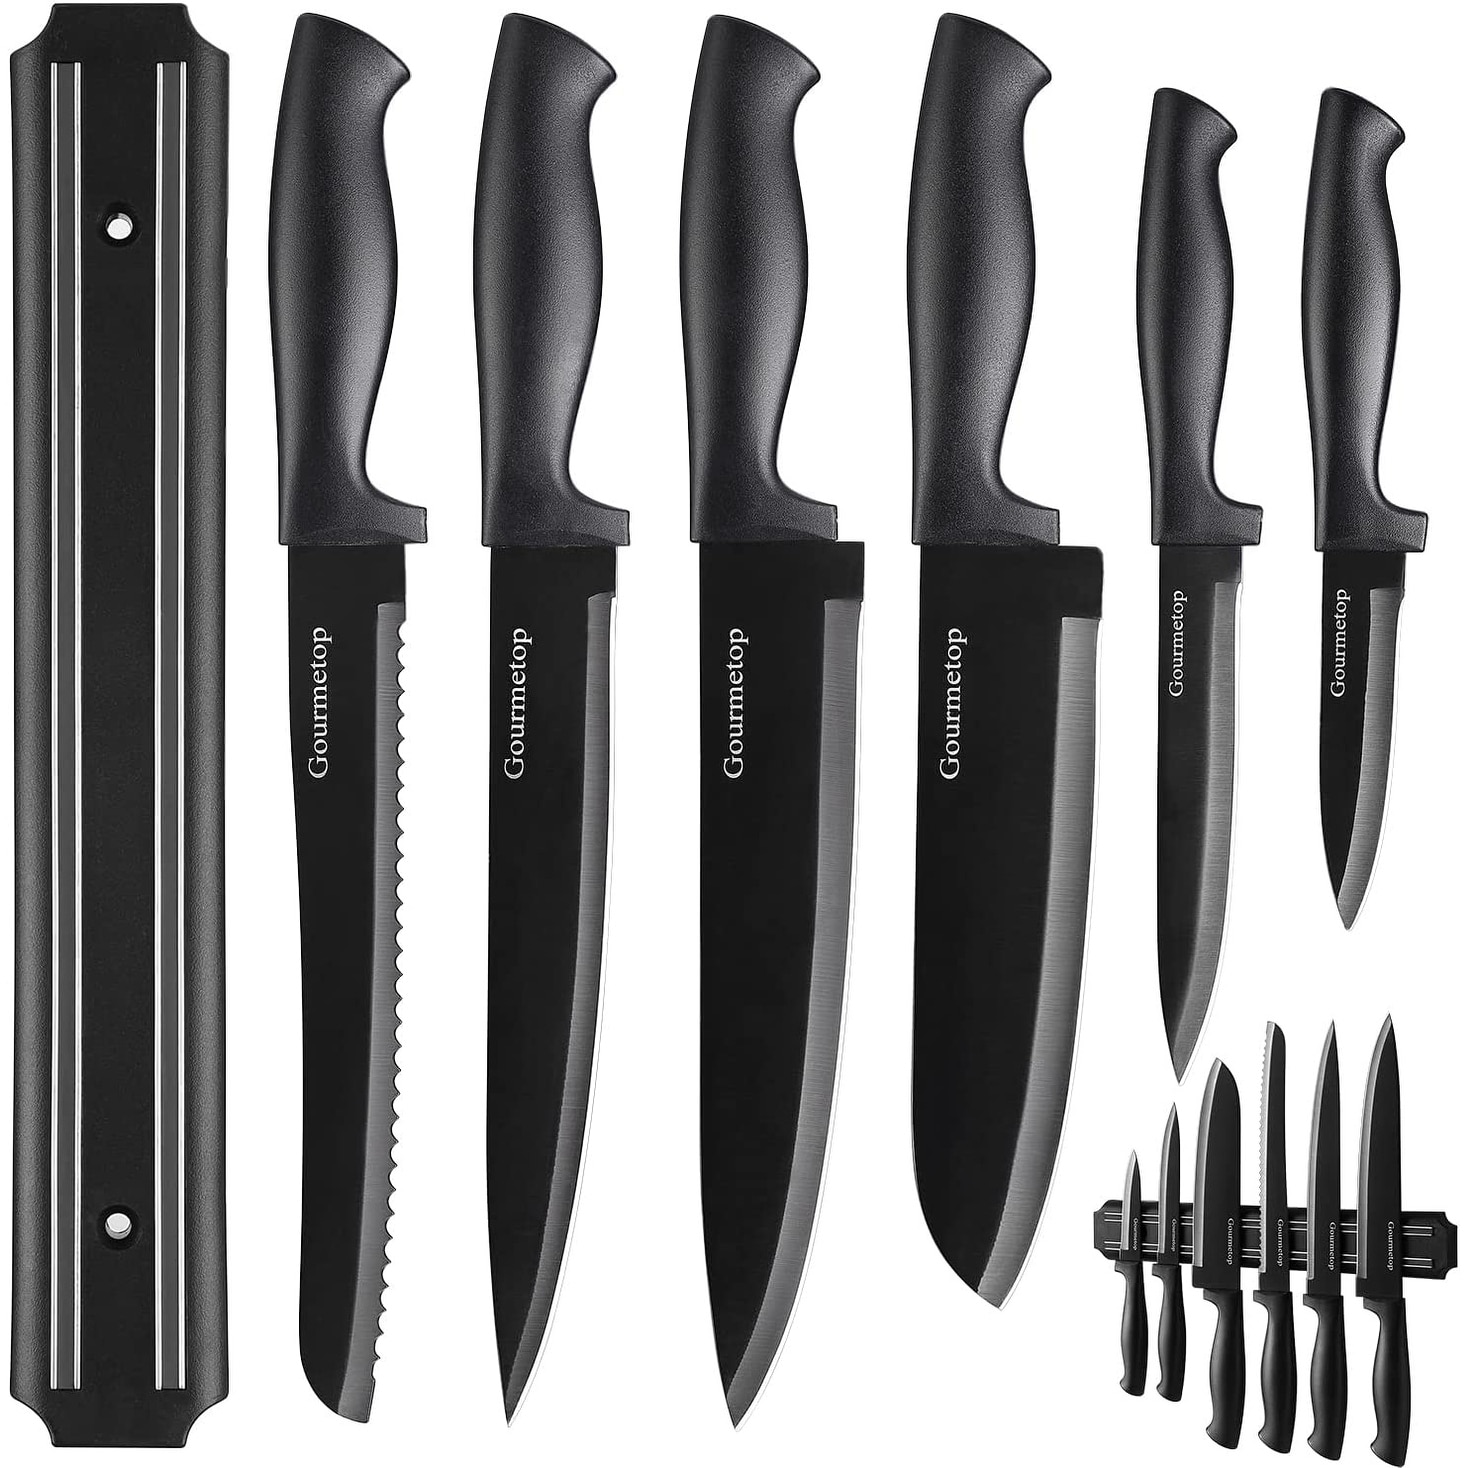 https://ak1.ostkcdn.com/images/products/is/images/direct/08aff7ad0895c44a1ac4b82177807ba8a2d9252a/Gourmetop-Kitchen-Knife-Set-with-No-Drilling-Magnetic-Strip.jpg